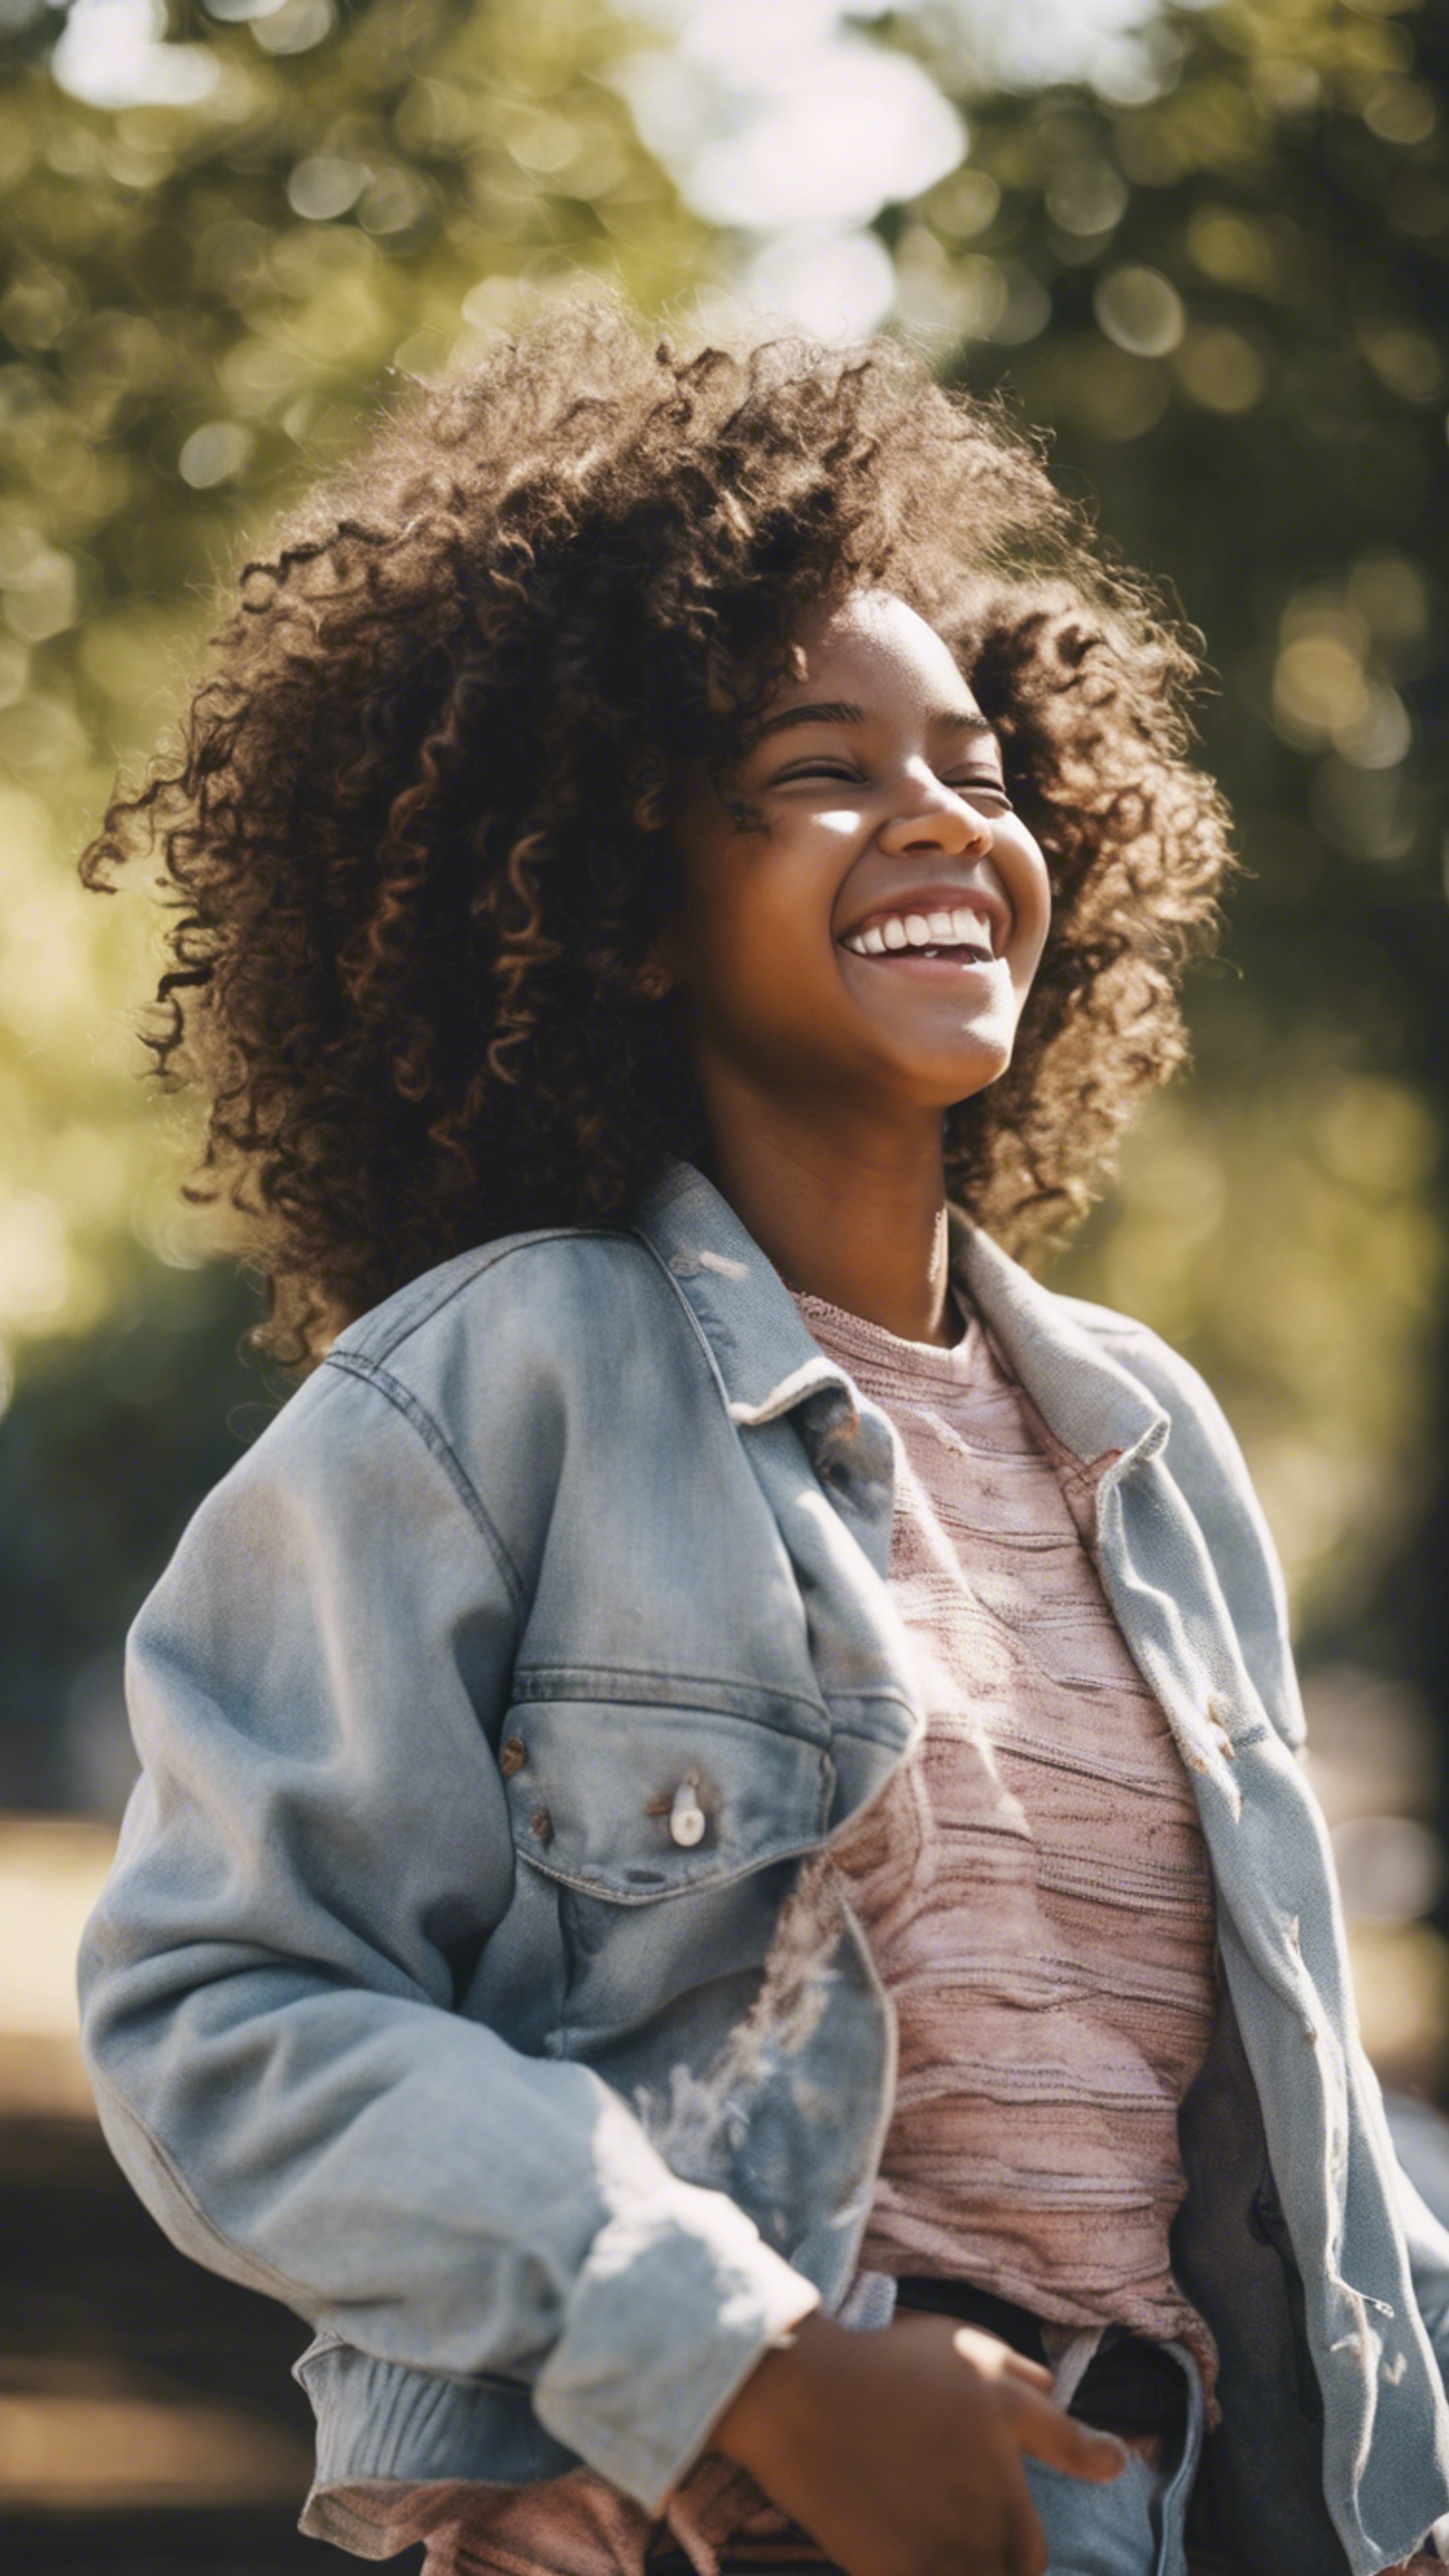 A confident young black girl with big, curly hair laughing while playing in a city park during a sunny afternoon. Tapet[a9bacc30abb04d56bfae]